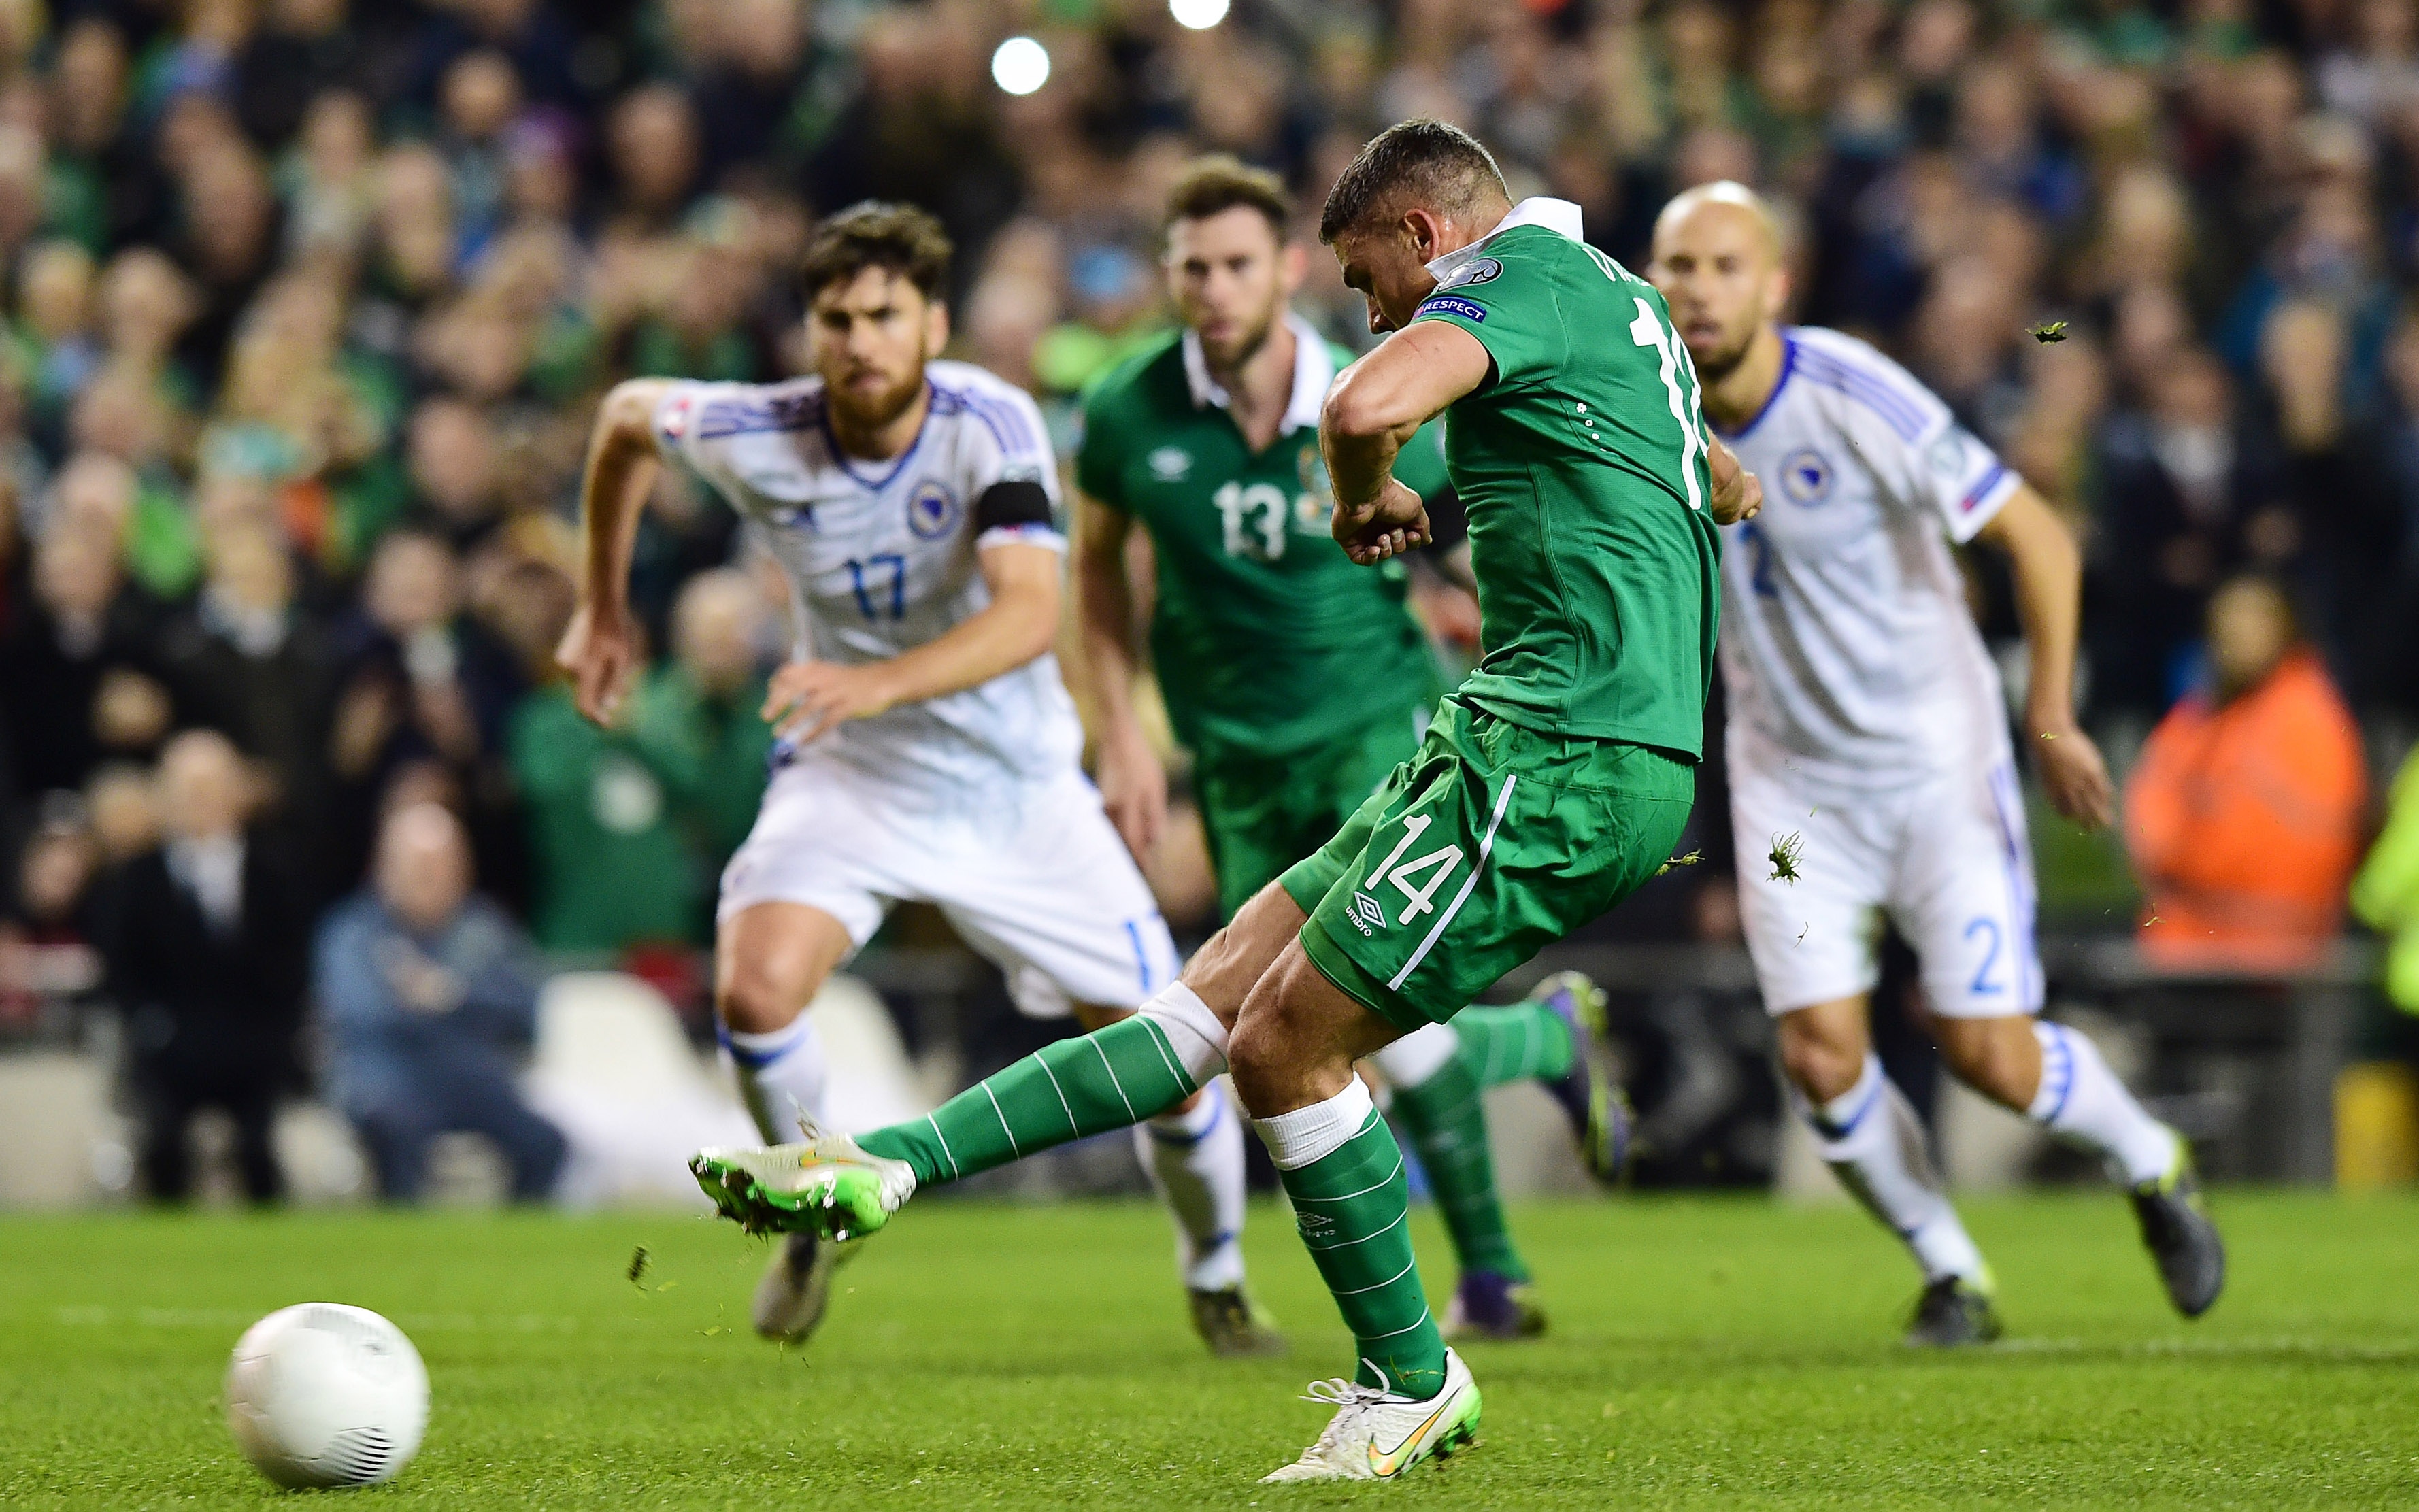 DUBLIN, IRELAND - NOVEMBER 16: Jon Walters of Republic of Ireland scores from the penalty spot during the Euro 2016 play-off second leg match between the Republic of Ireland and Bosnia-Herzegovina at Aviva Stadium on November 16, 2015 in Dublin, Ireland. (Photo by Charles McQuillan/Getty Images)